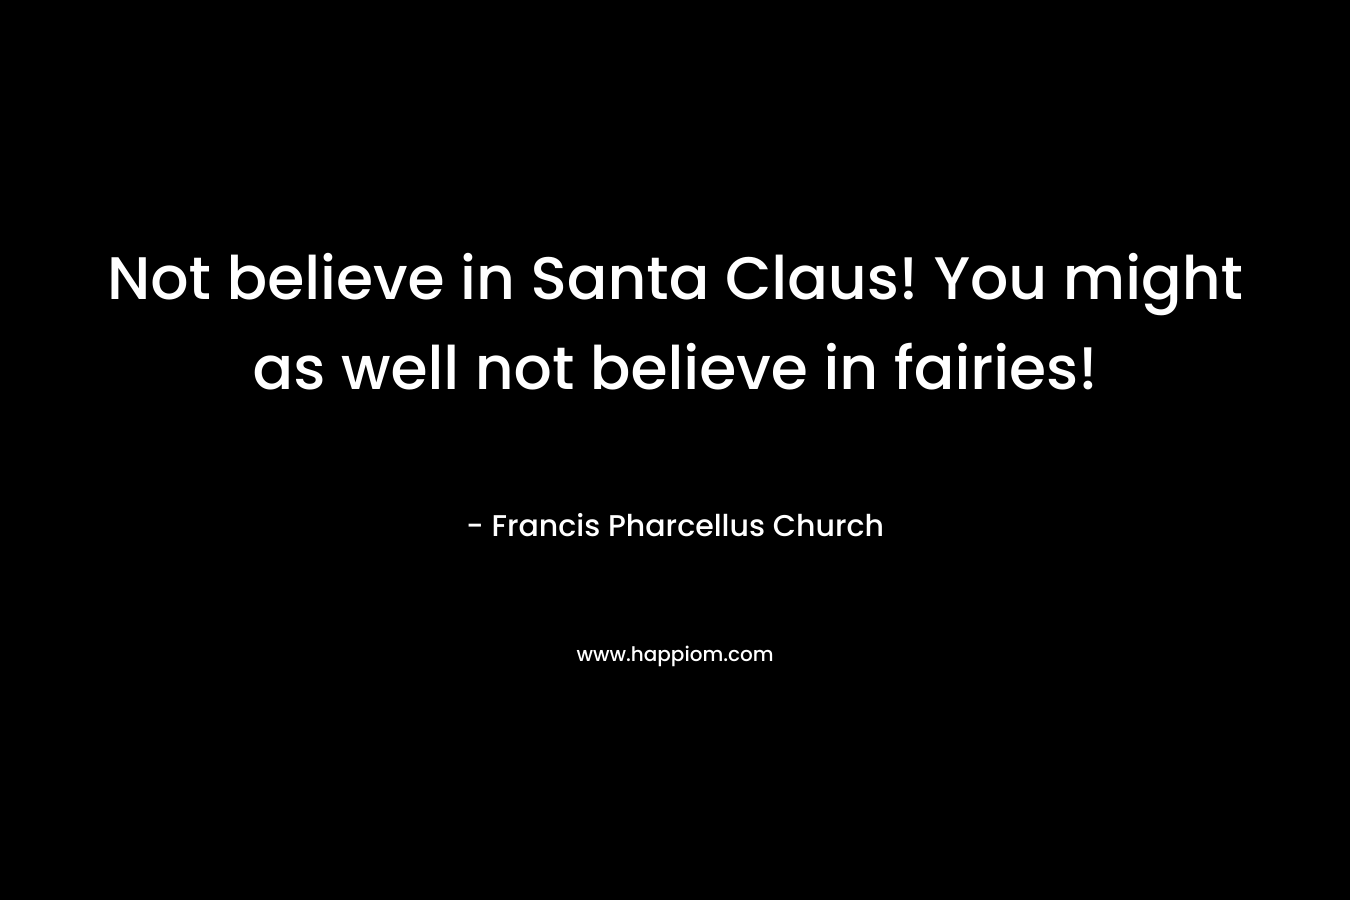 Not believe in Santa Claus! You might as well not believe in fairies!